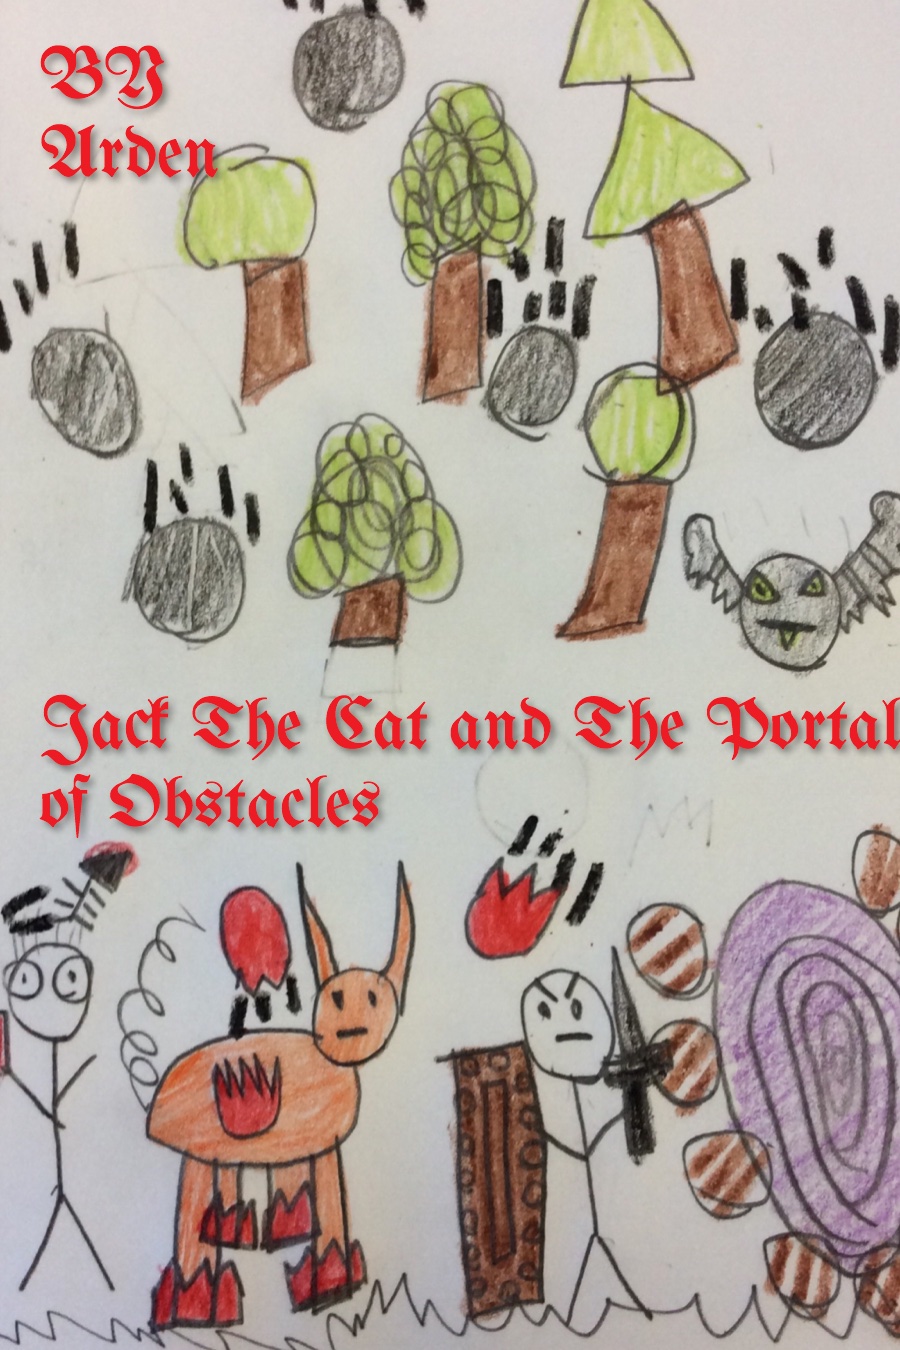 Jack the Cat and The Forest of Obstacles by Arden W